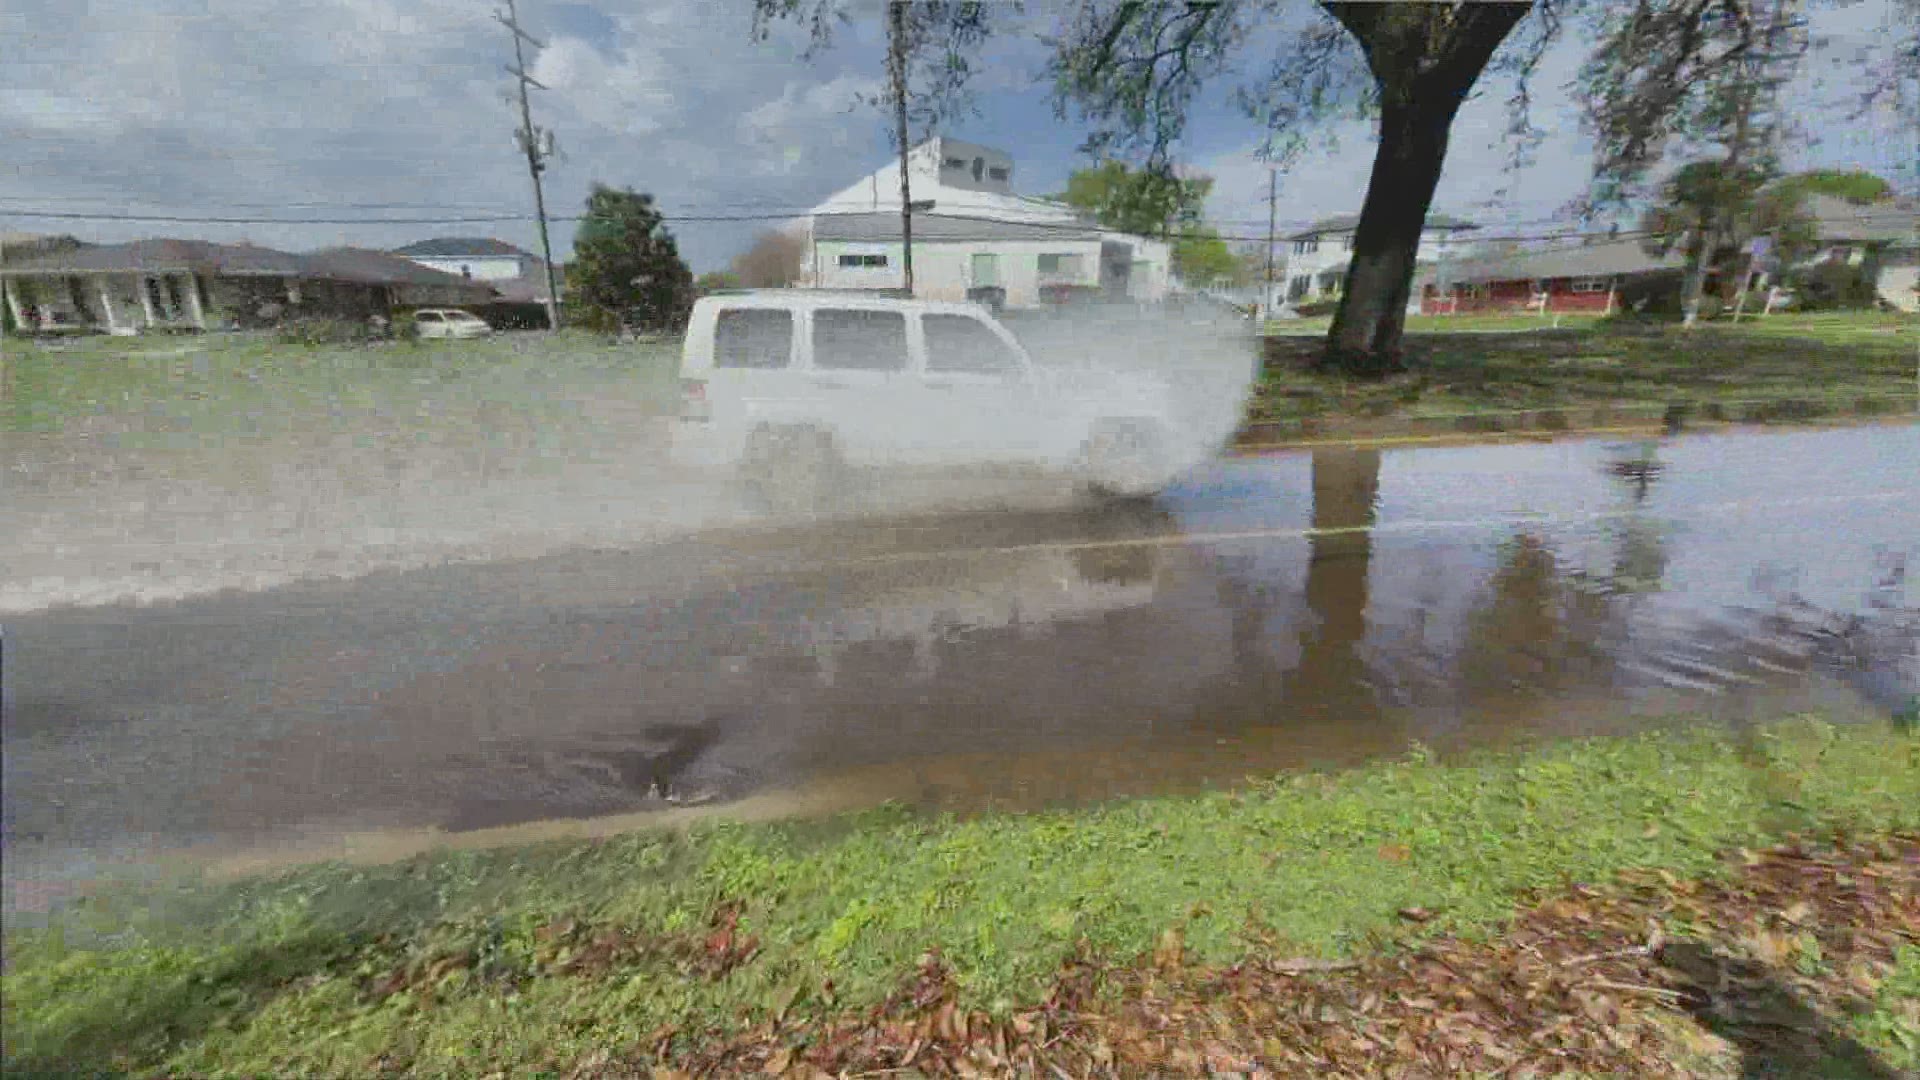 A downed drainage pump and probably blocked catch basins caused severe street flooding in the Lakeview area.